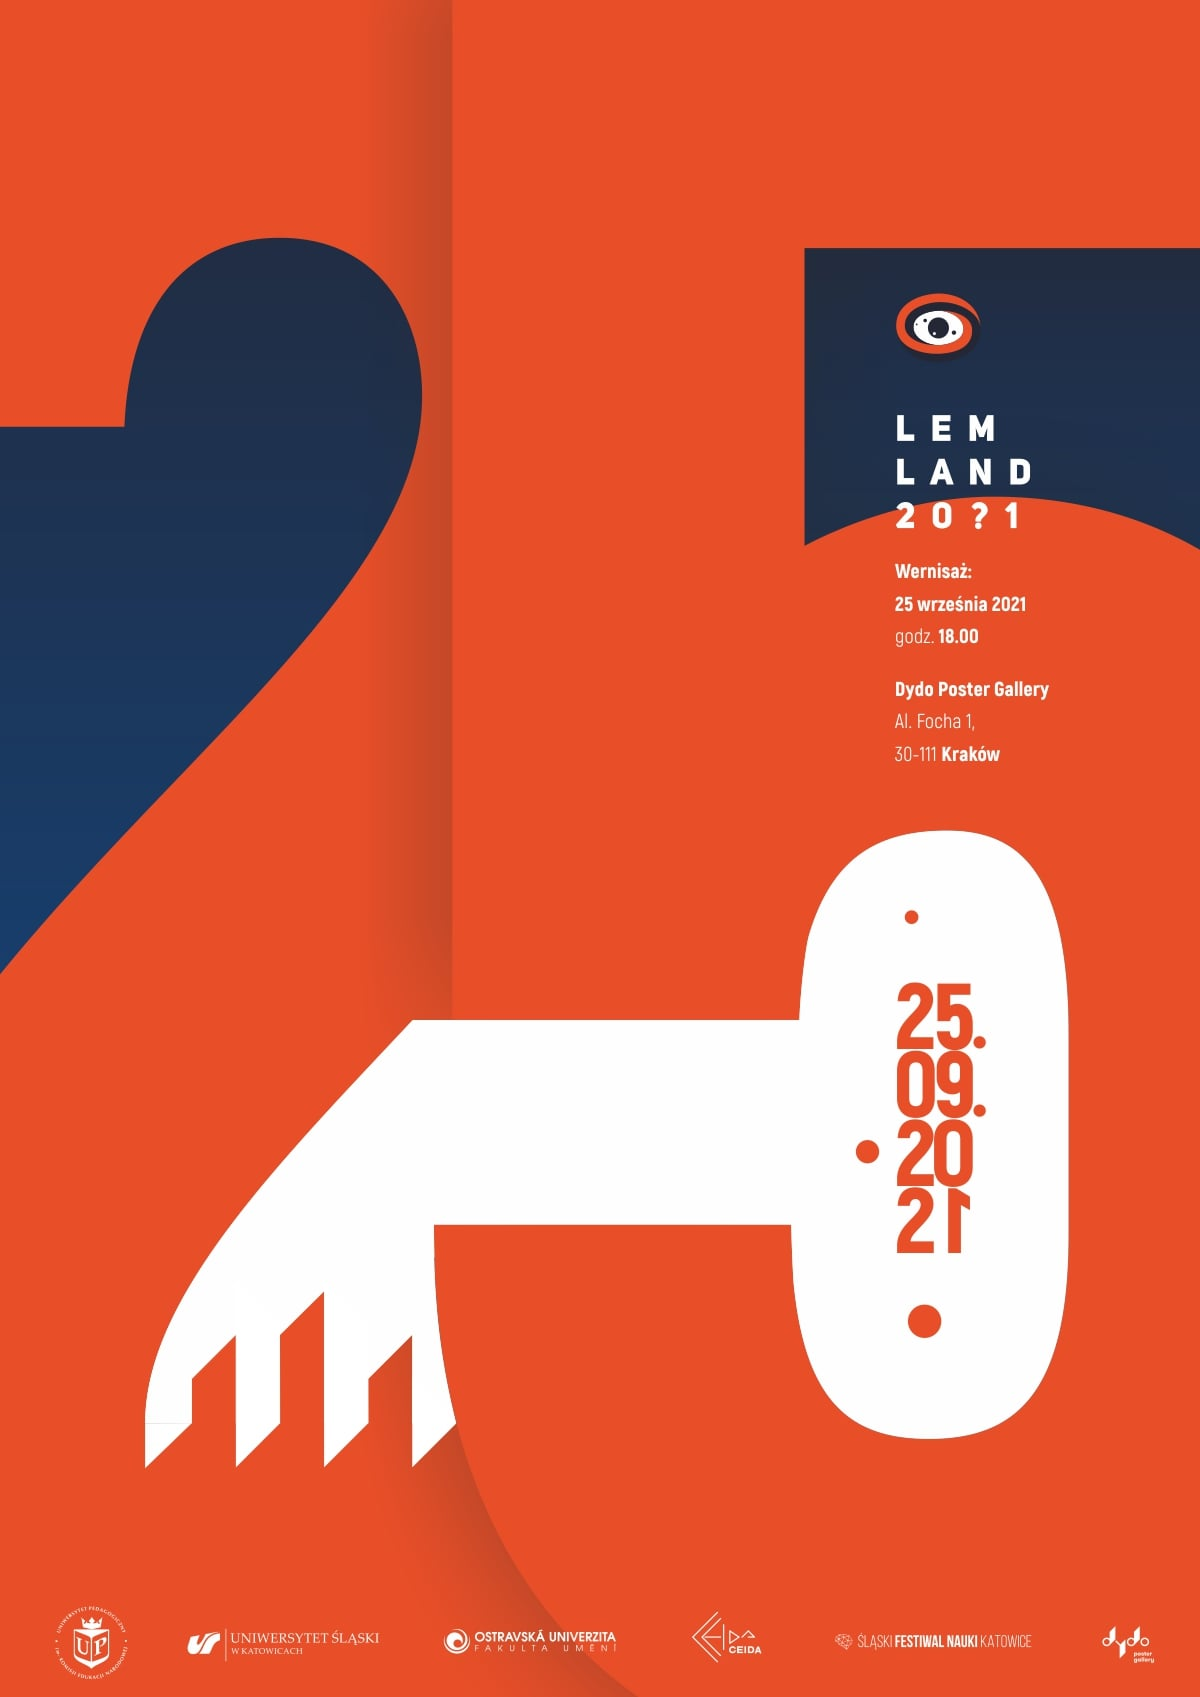 Exhibition / Lemland 2021 International Poster Competition